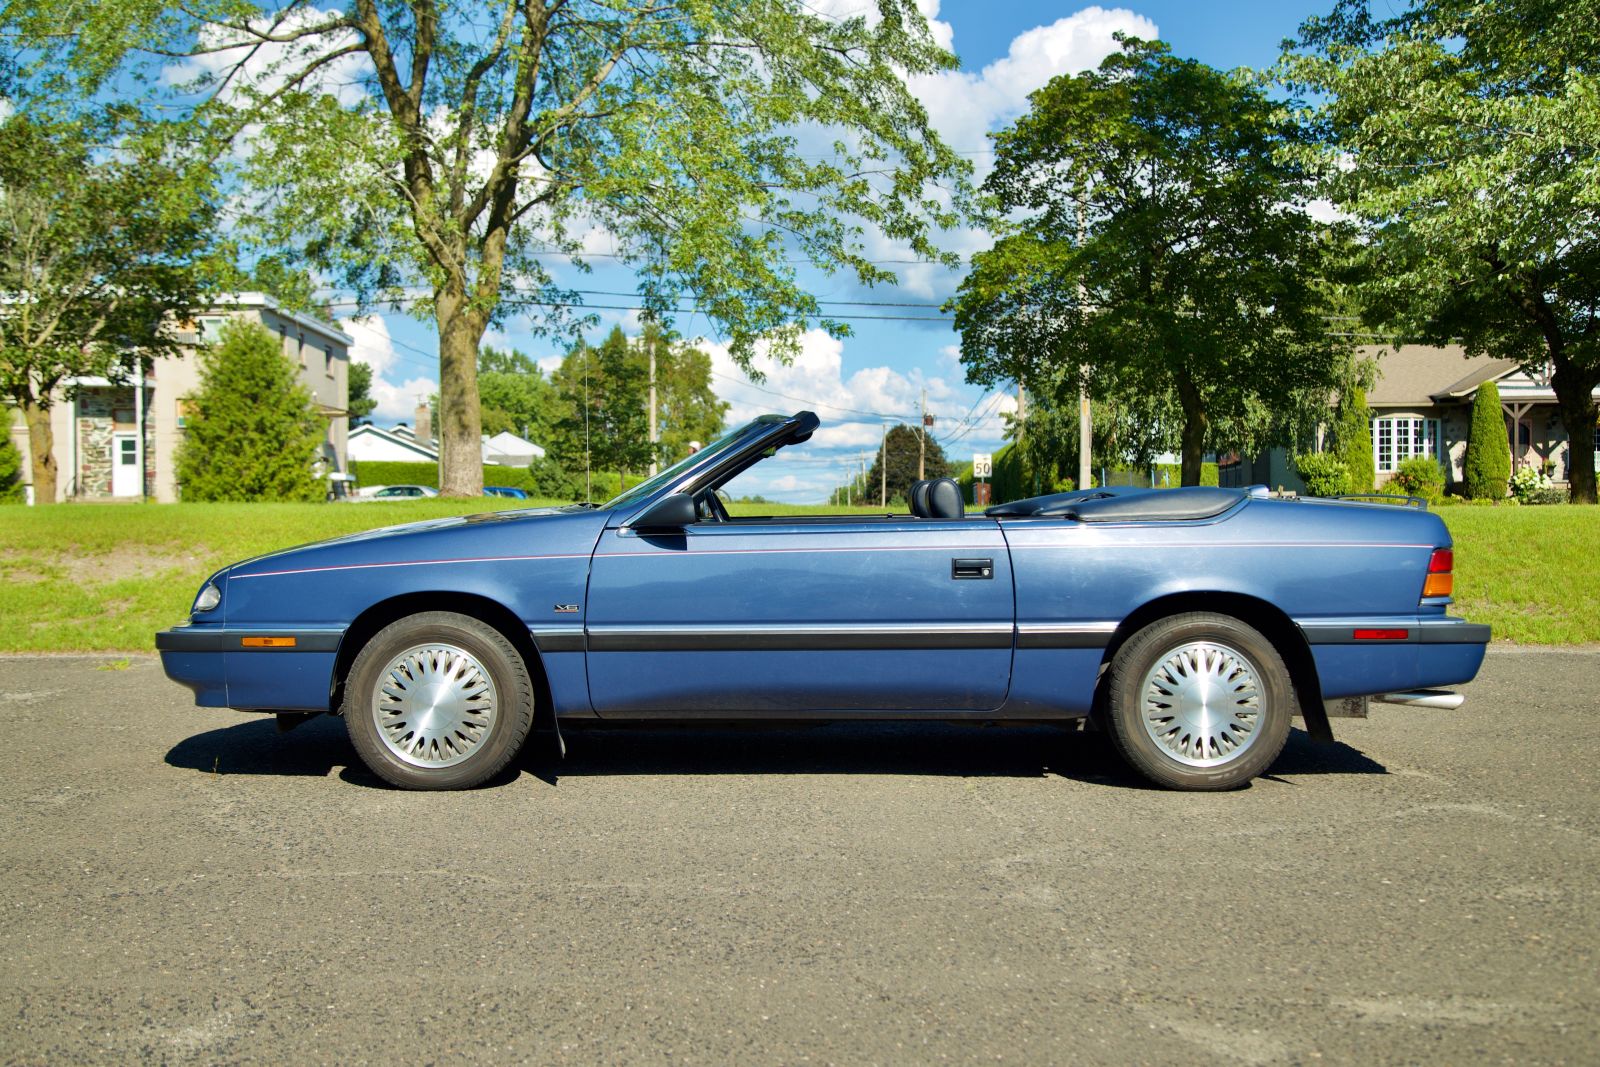 Illustration for article titled I Drove an Insanely Mint 93 LeBaron Convertible